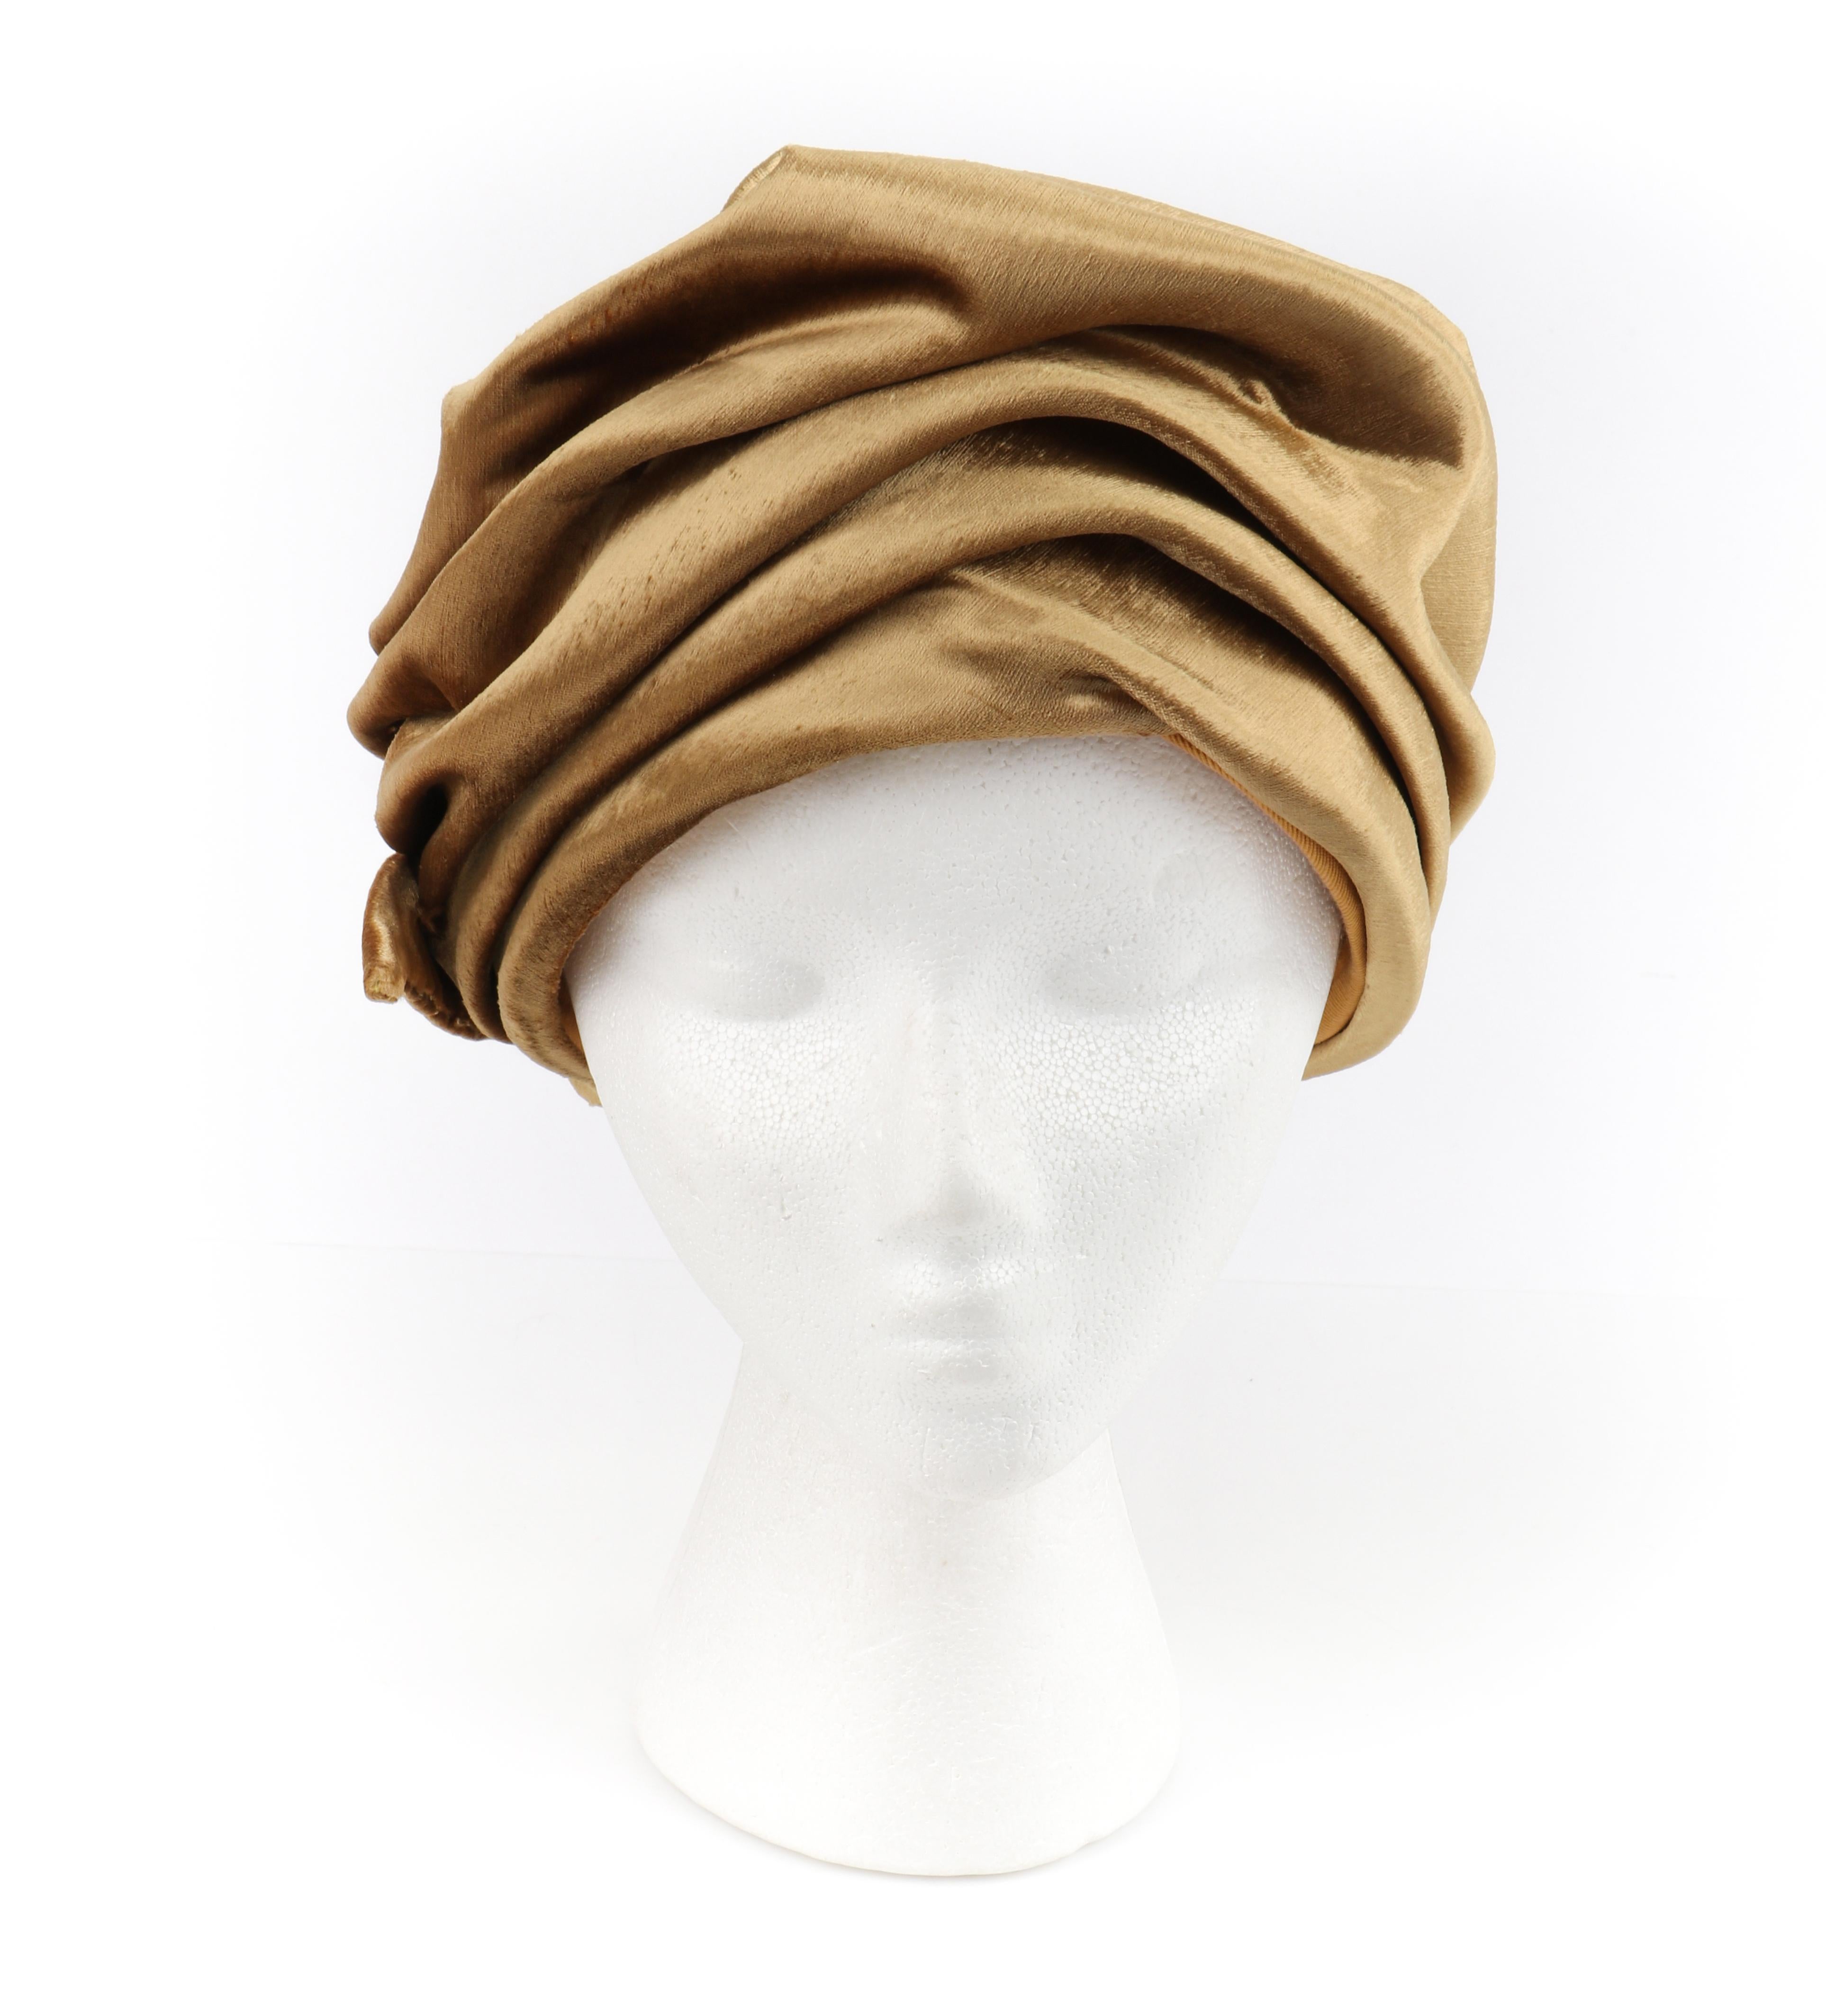 CHRISTIAN DIOR c.1960s Gold Silk Velvet Tied Back Bow Turban Cloche Hat
 
Circa: 1960’s
Label(s): Christian Dior Chapeaux; Union tag
Designer: Yves Saint Laurent
Style: Turban hat
Color(s): Shades of gold (exterior); warm brown (interior)
Lined: